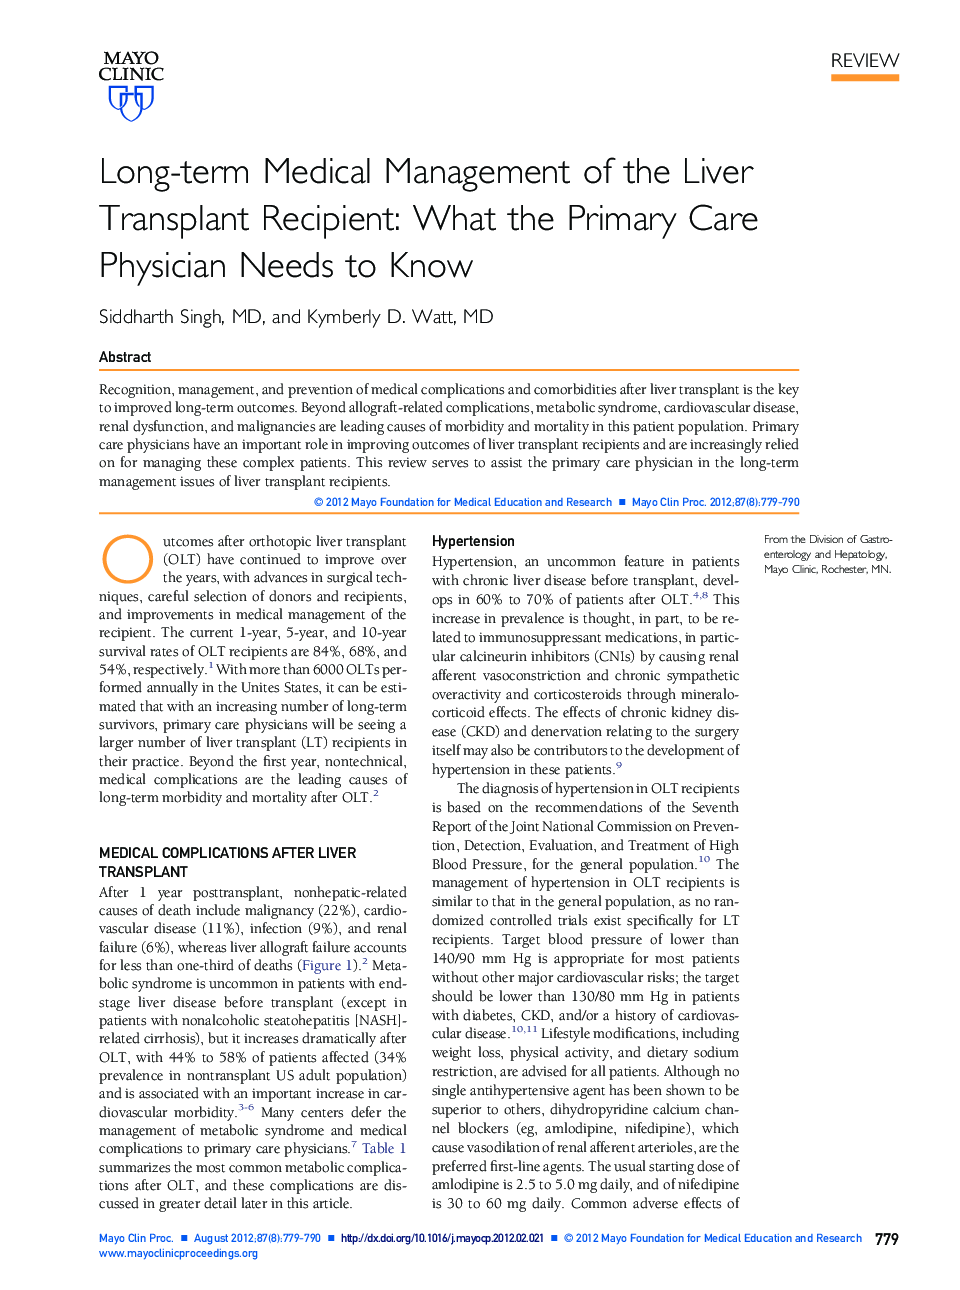 Long-term Medical Management of the Liver Transplant Recipient: What the Primary Care Physician Needs to Know